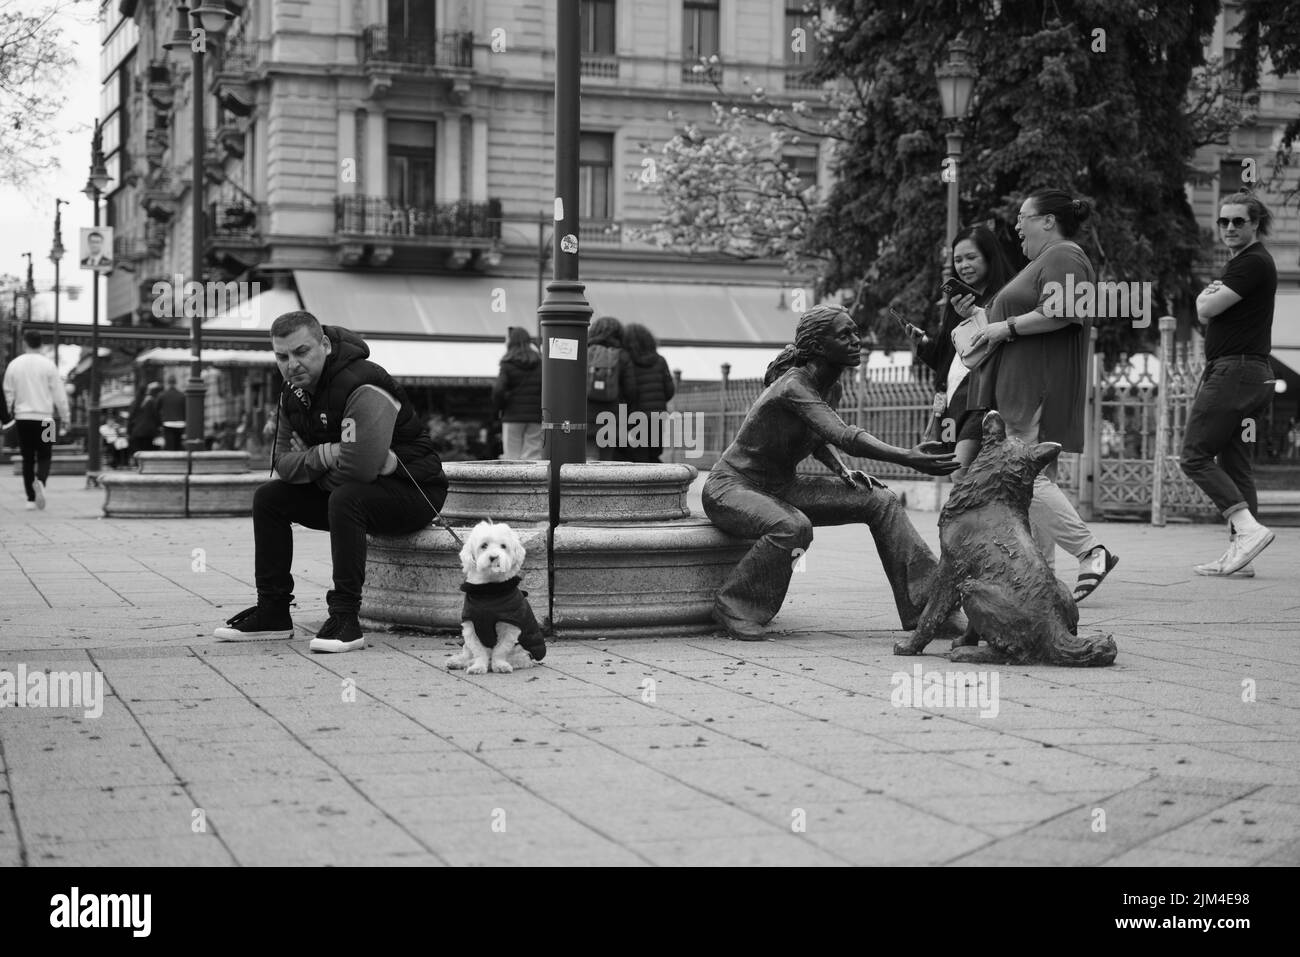 A view in black and white of people in the streets of Budapest, Hungary Stock Photo